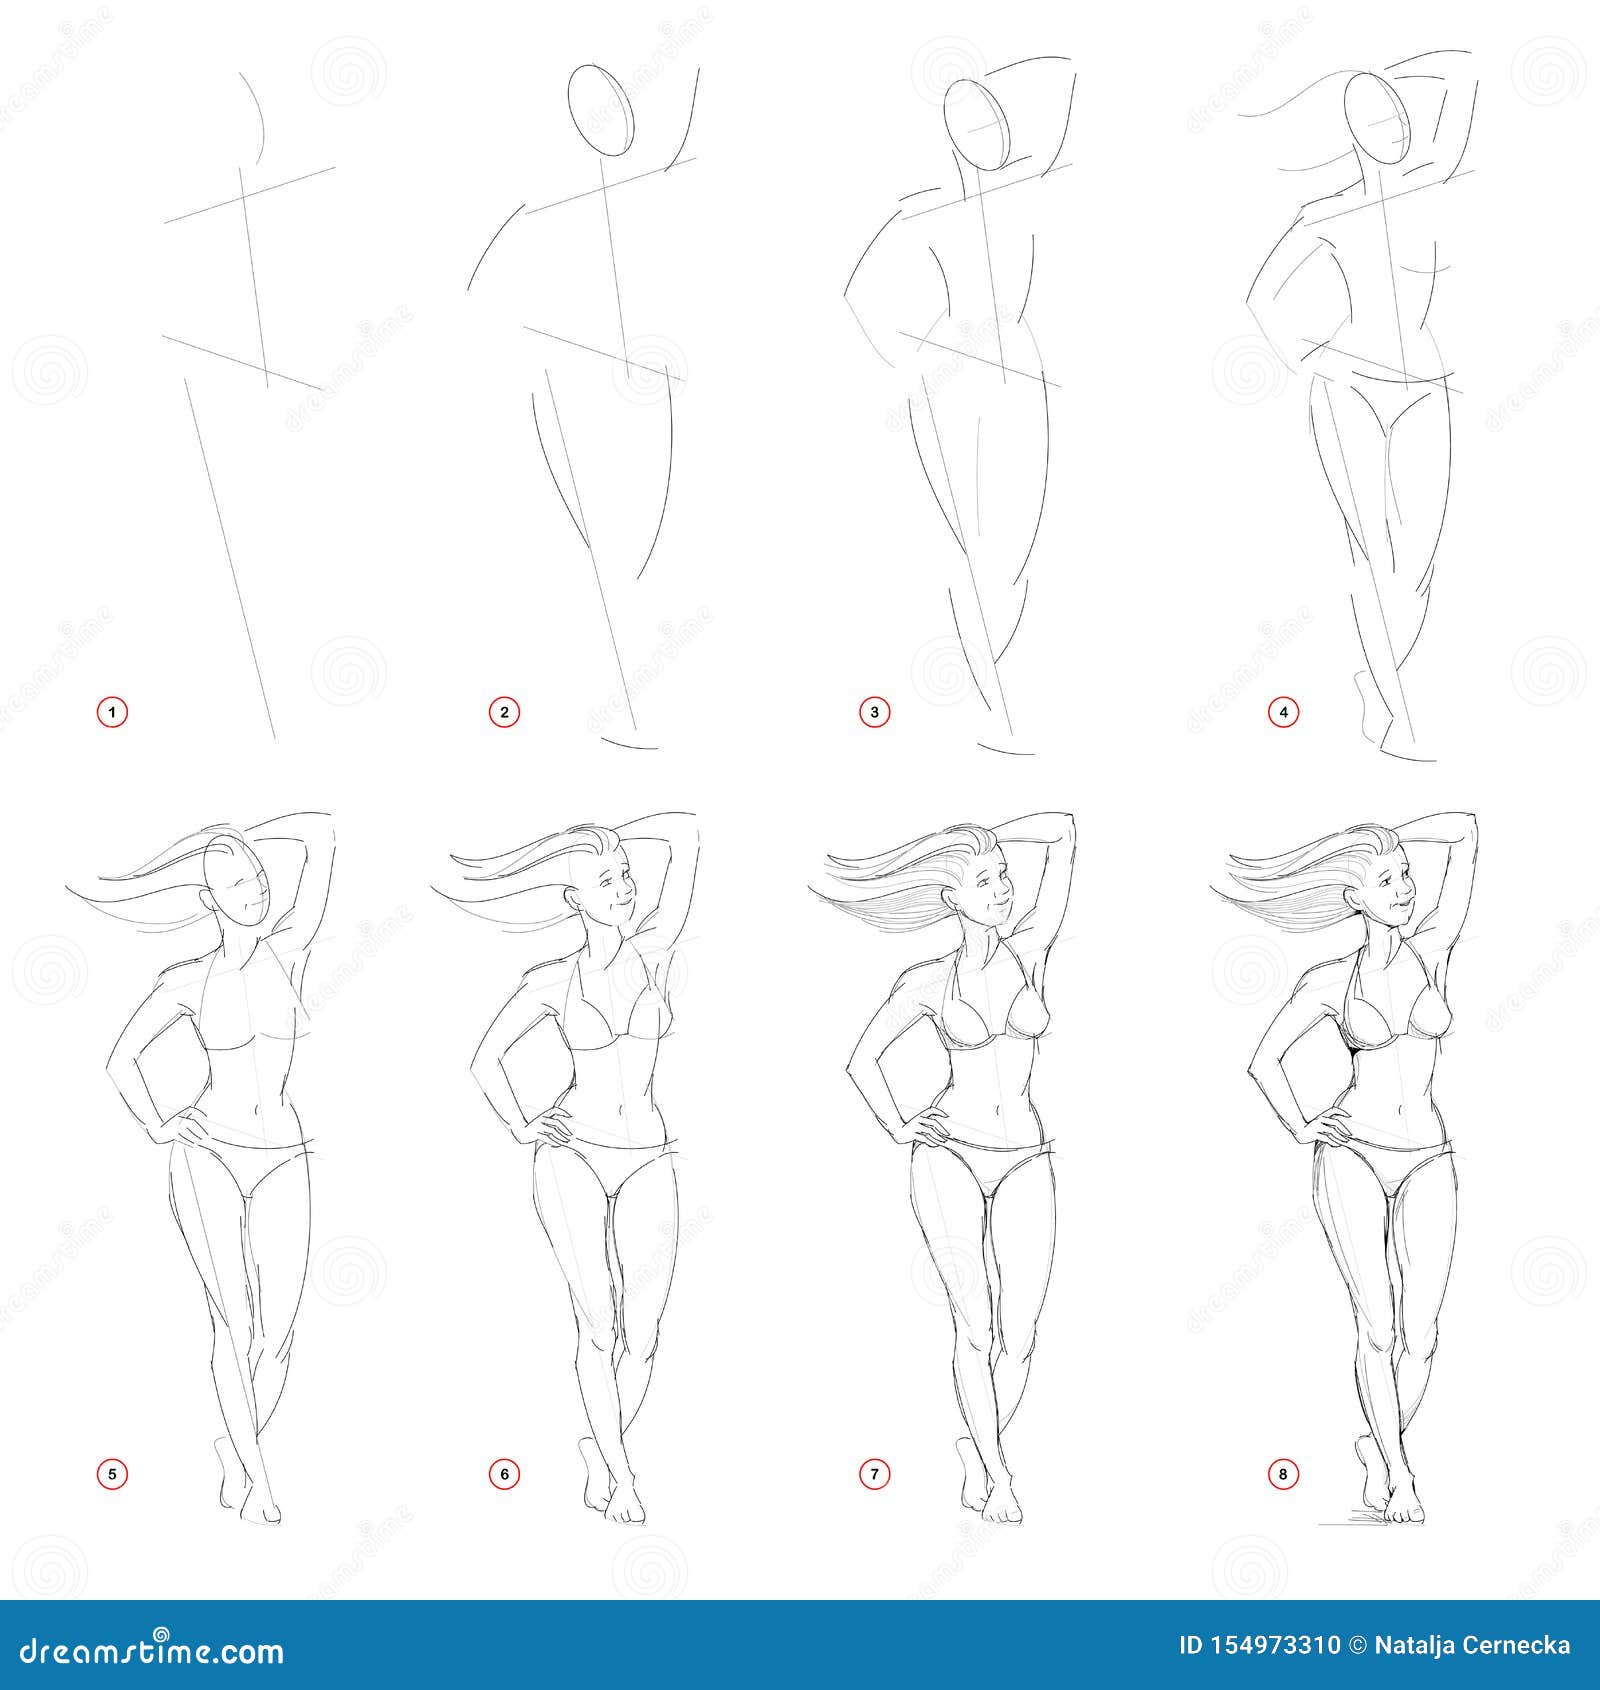 Share 171+ pencil drawings step by step